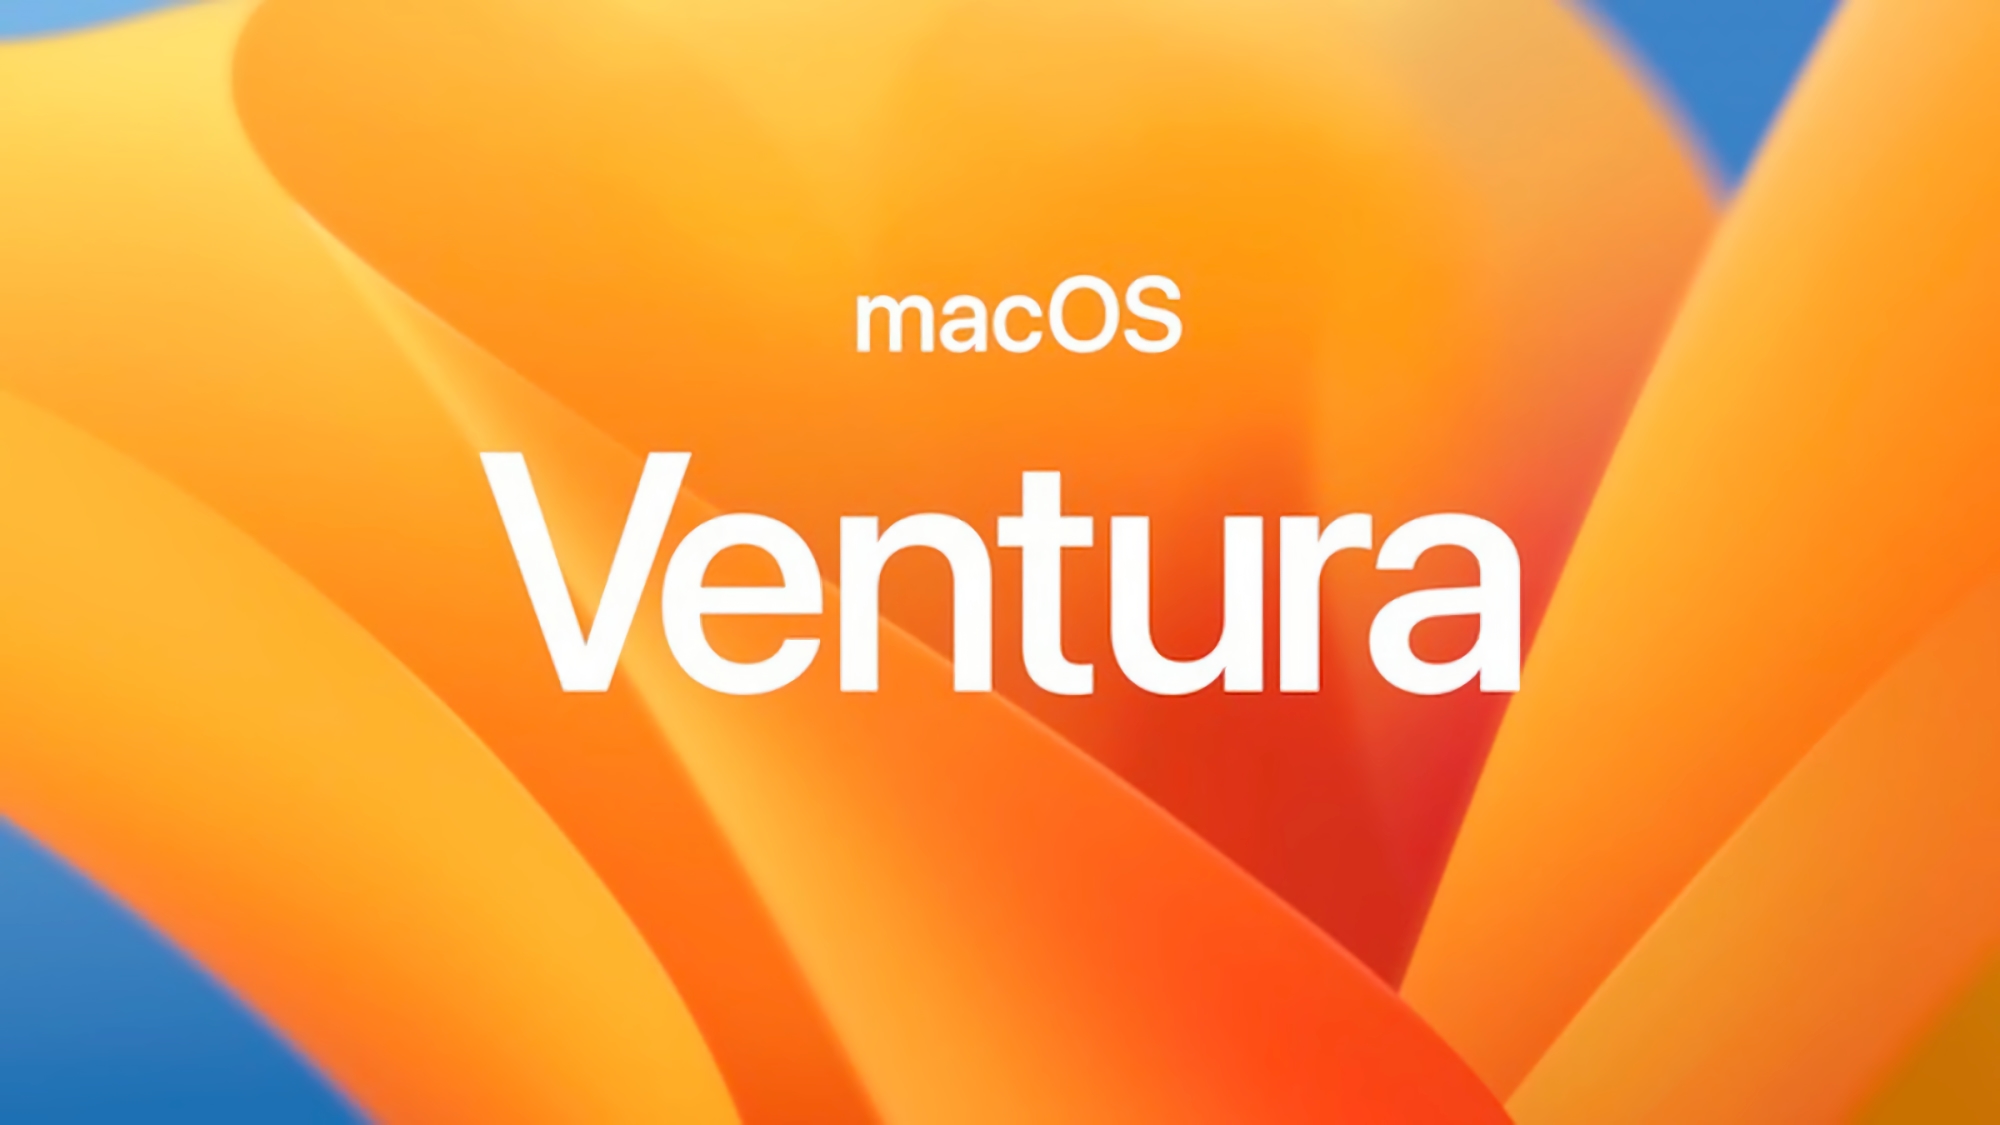 It's here! The stable version of macOS Ventura is out